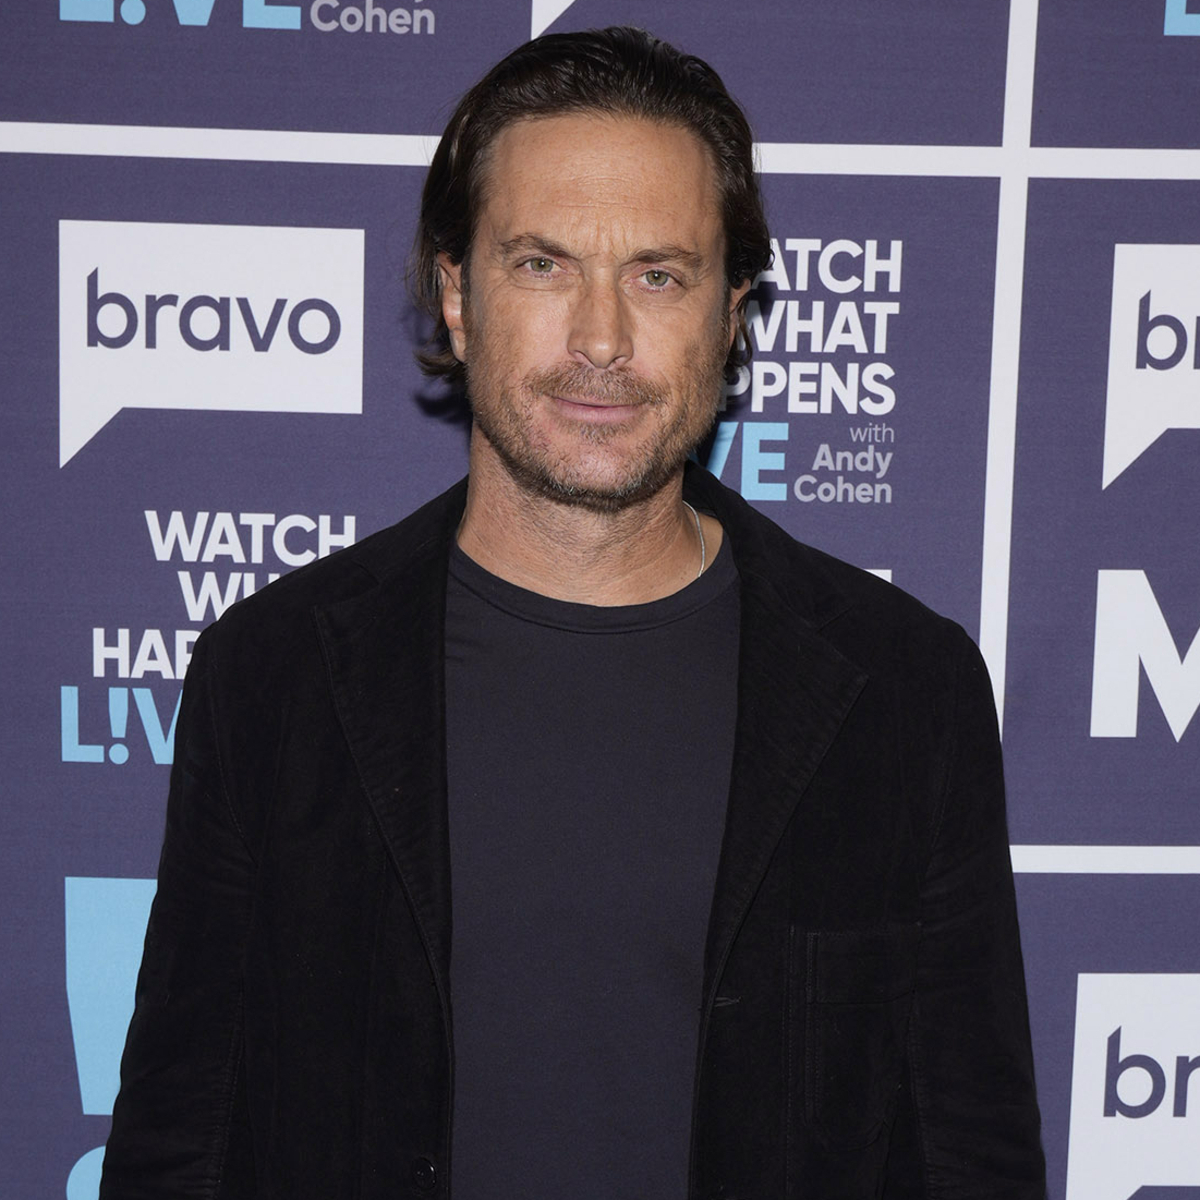 Oliver Hudson Clarifies Comments on Having "Trauma" From Goldie Hawn